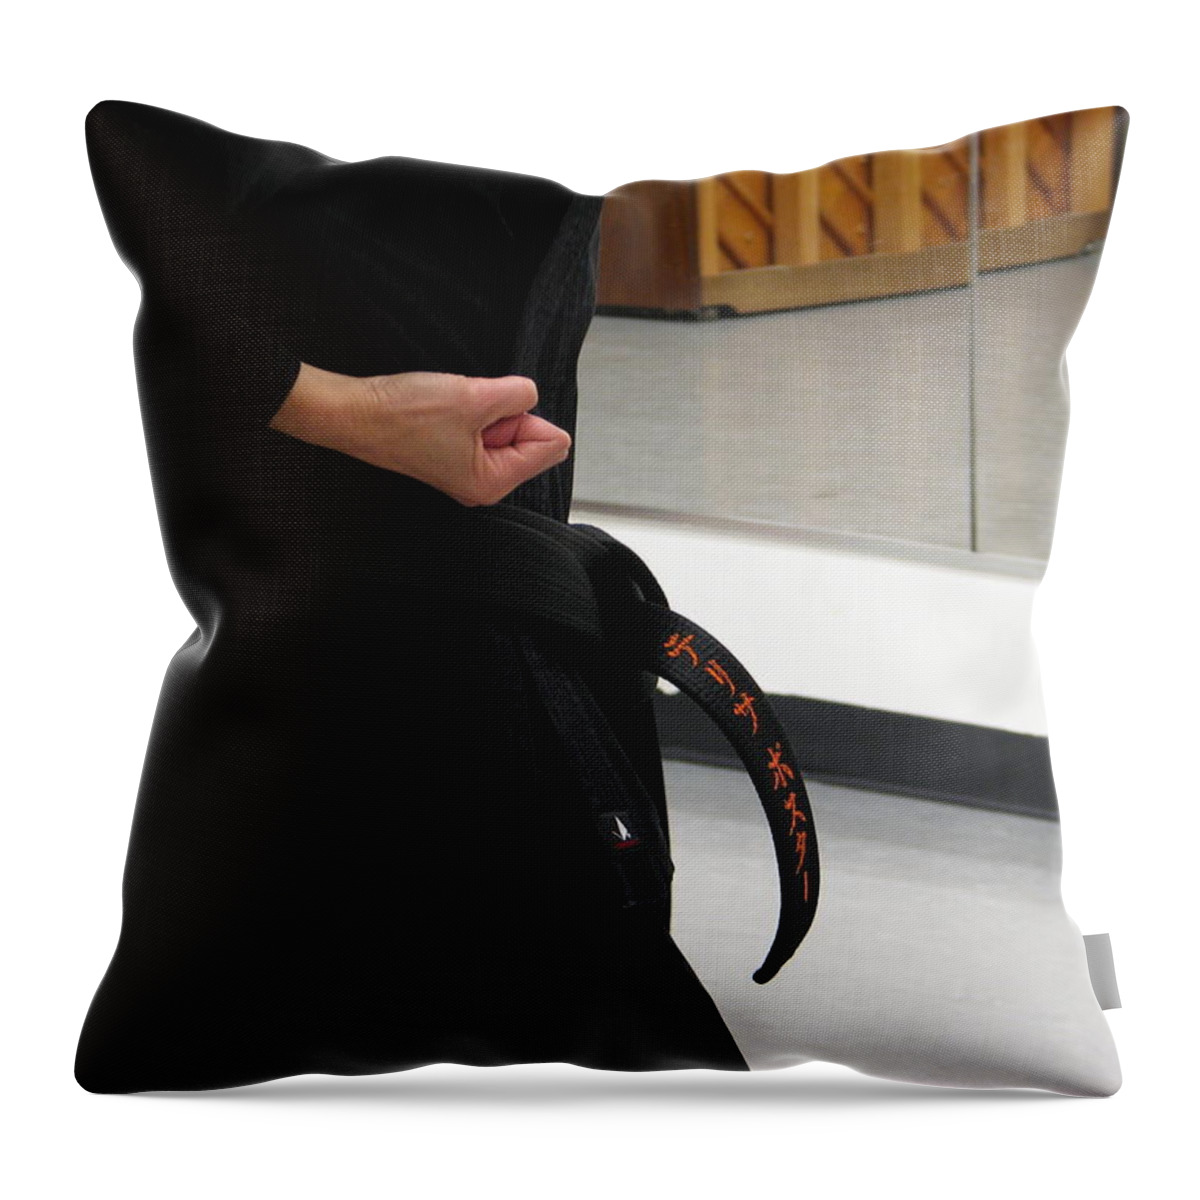 Karate Throw Pillow featuring the photograph Theresa by Kelly Mezzapelle